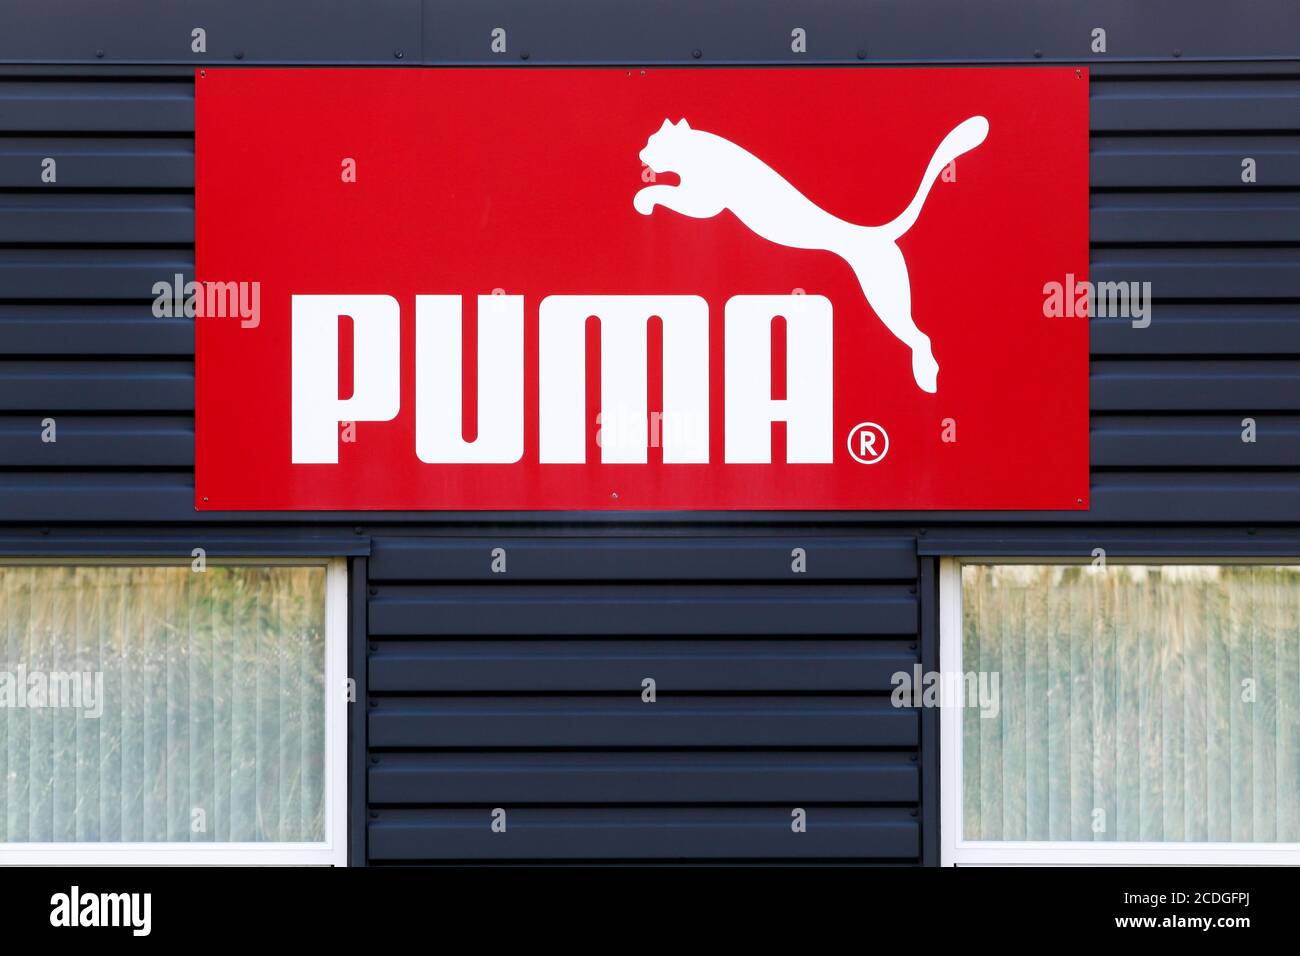 Skanderborg, Denmark - July 16, 2019: Puma logo on a facade. Puma is a major german multinational company that produces athletic and casual footwear Stock Photo